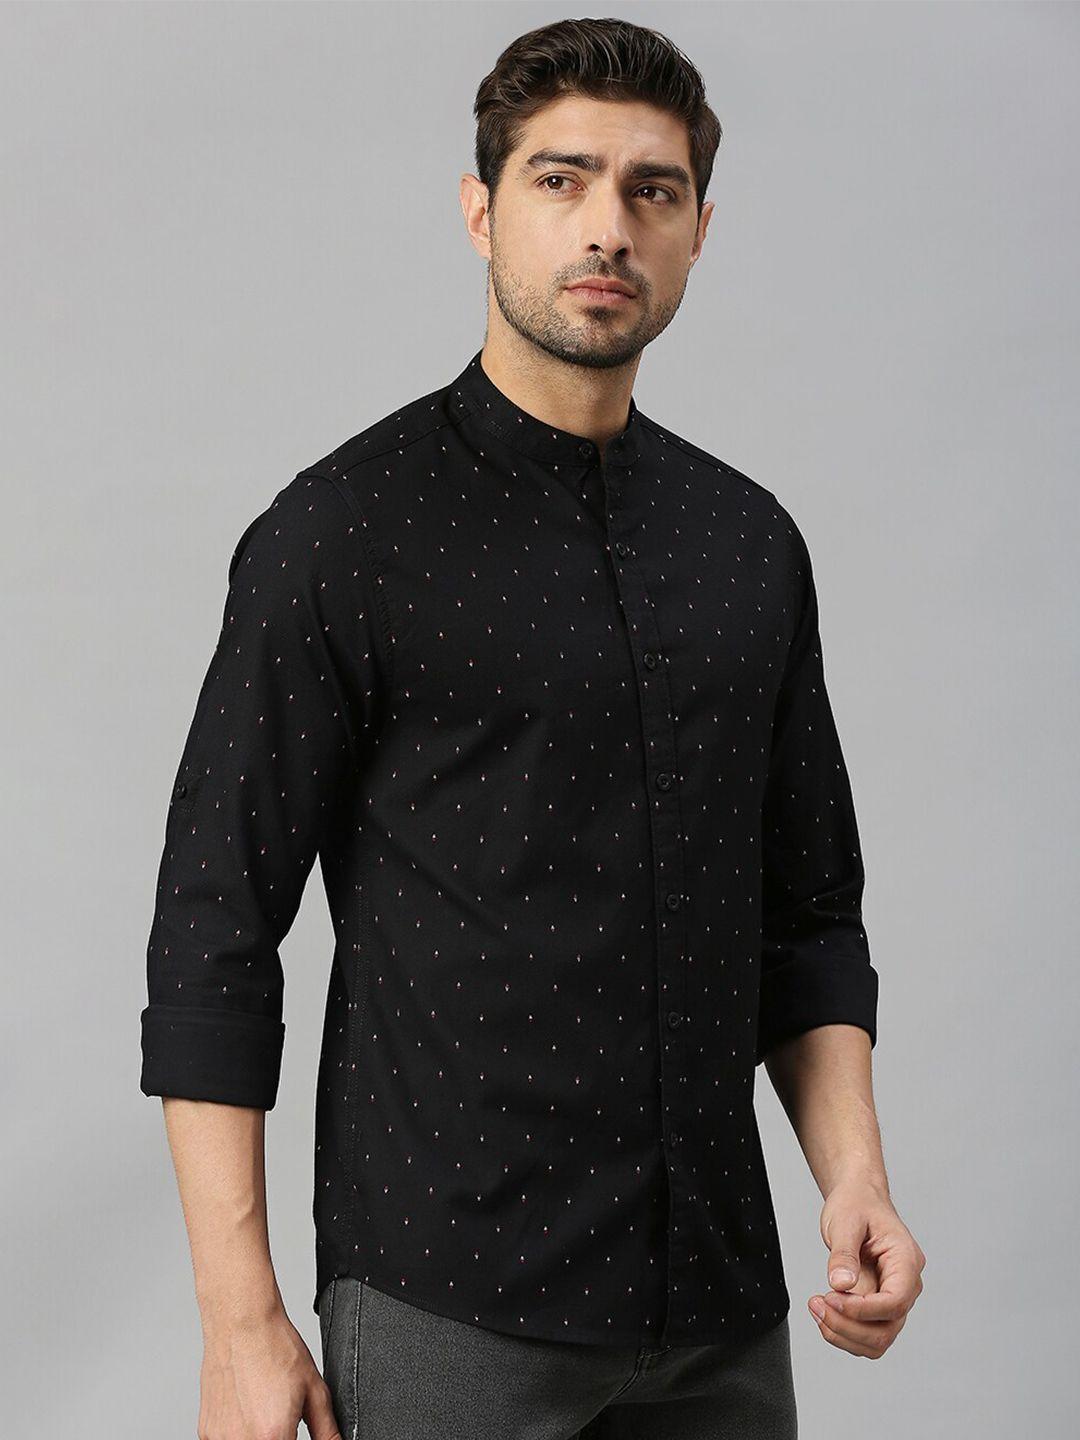 here&now black classic slim fit micro ditsy printed pure cotton casual shirt